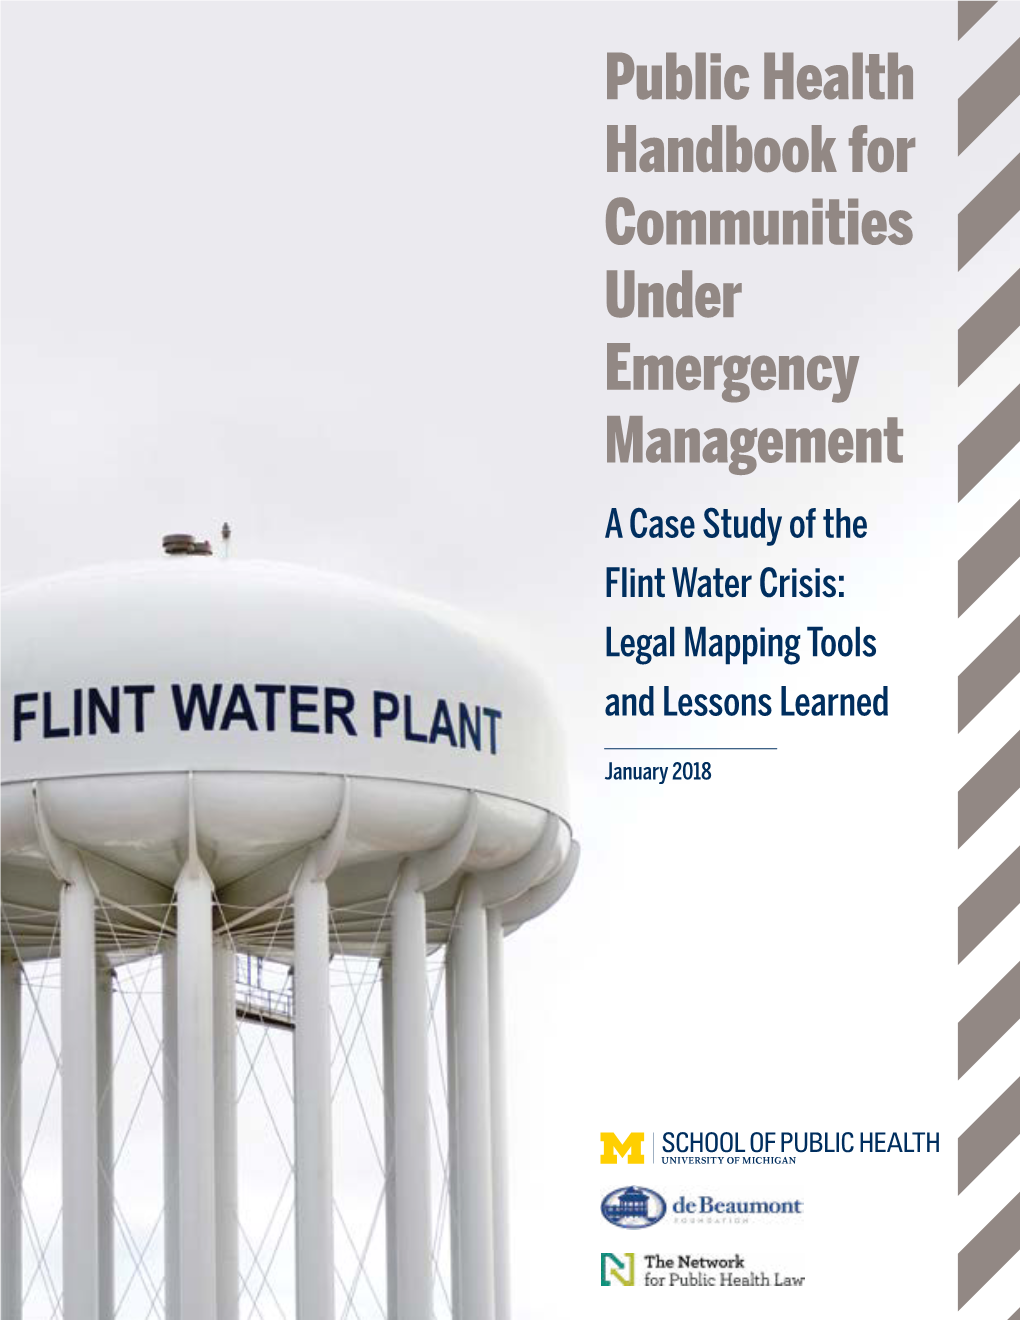 Public Health Handbook for Communities Under Emergency Management a Case Study of the Flint Water Crisis: Legal Mapping Tools and Lessons Learned